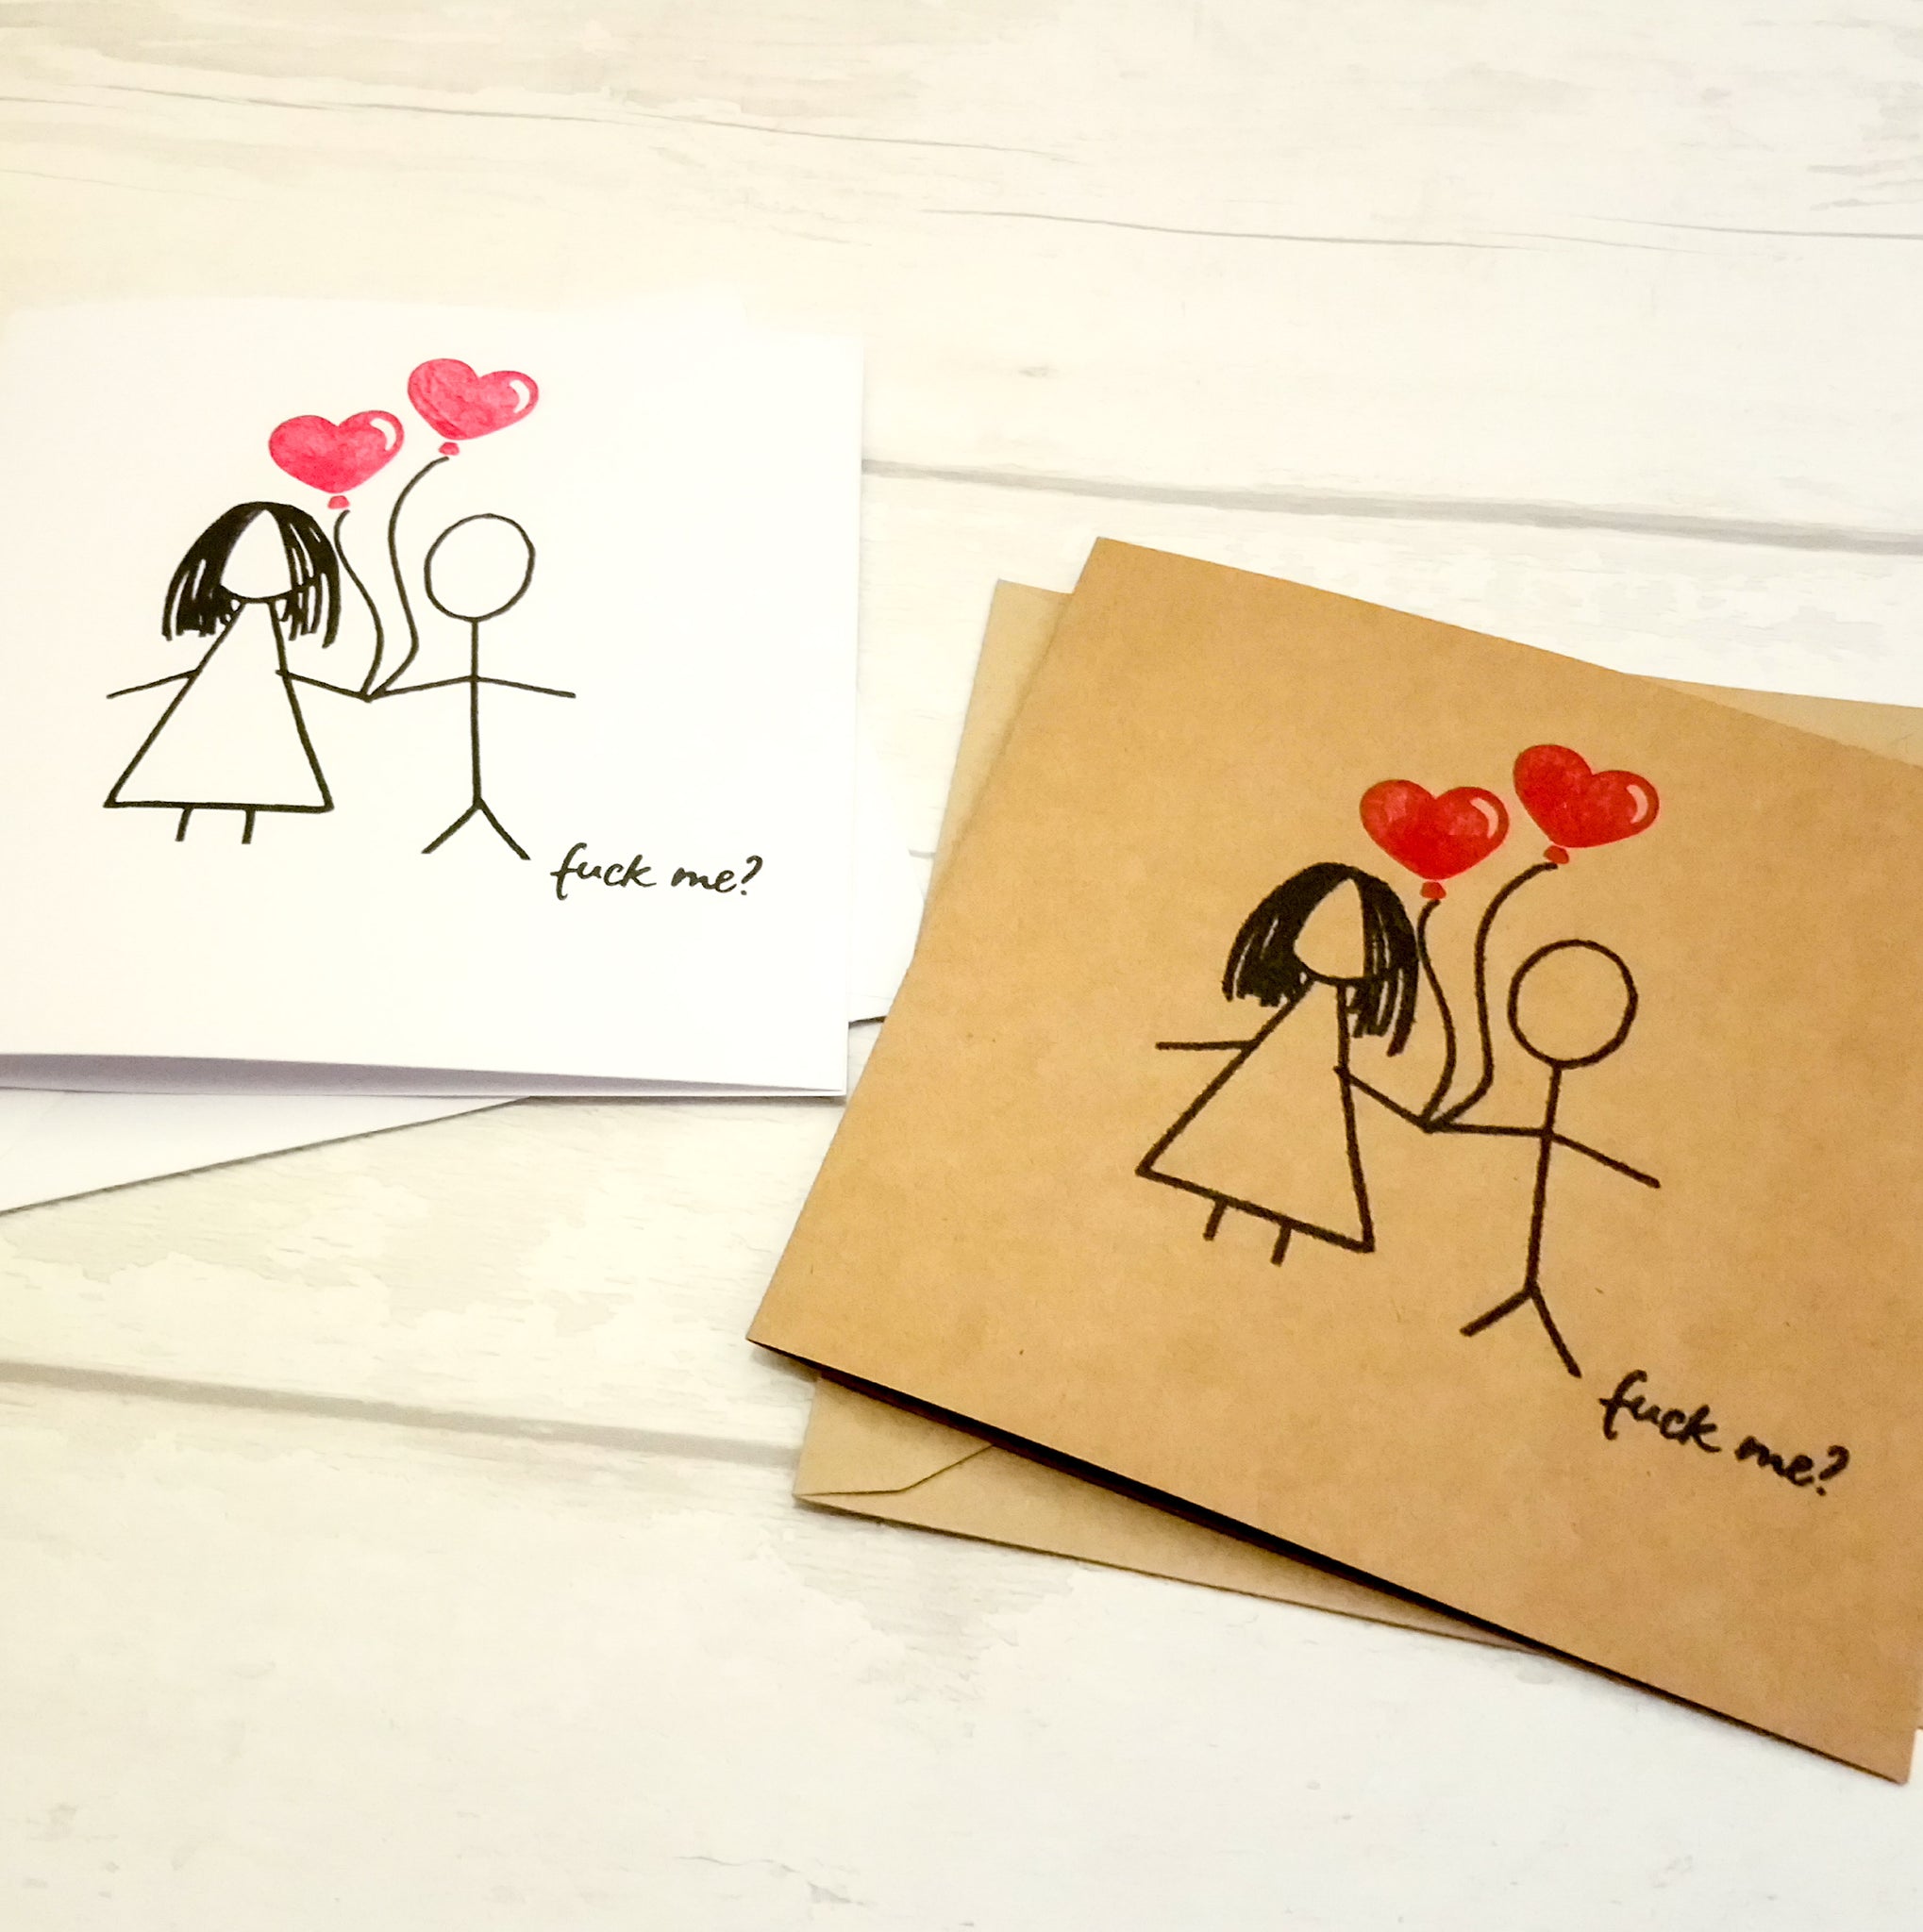 Funny cheeky rude "f*ck me?" stick people card - Valentine's, wedding, anniversary